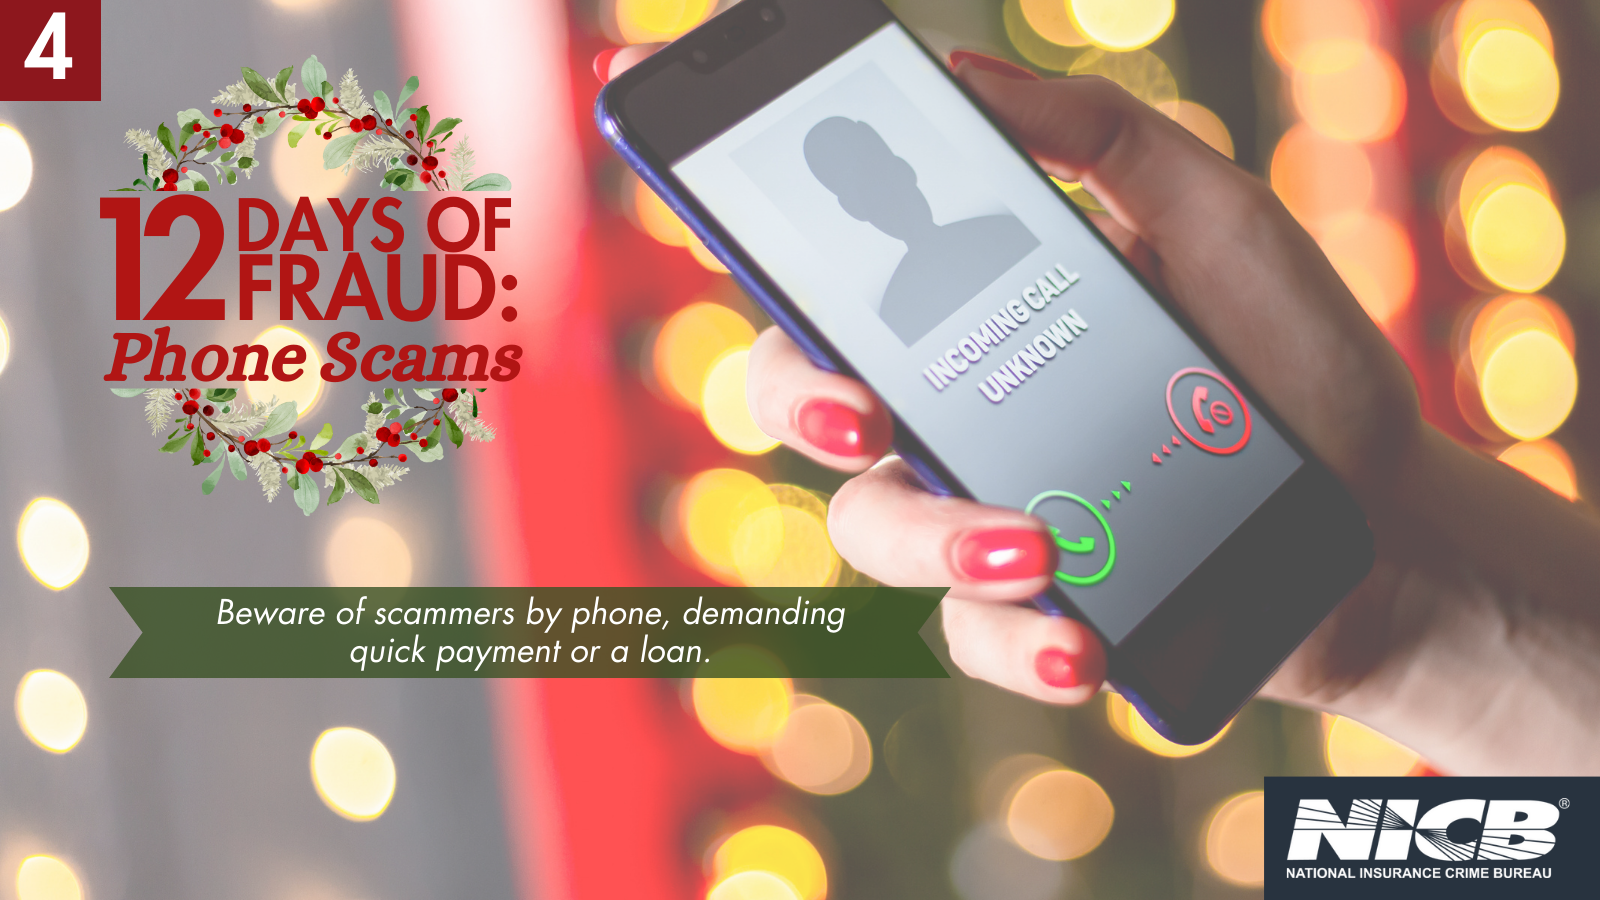 Beware of scammers by phone, demanding quick payment or a loan.